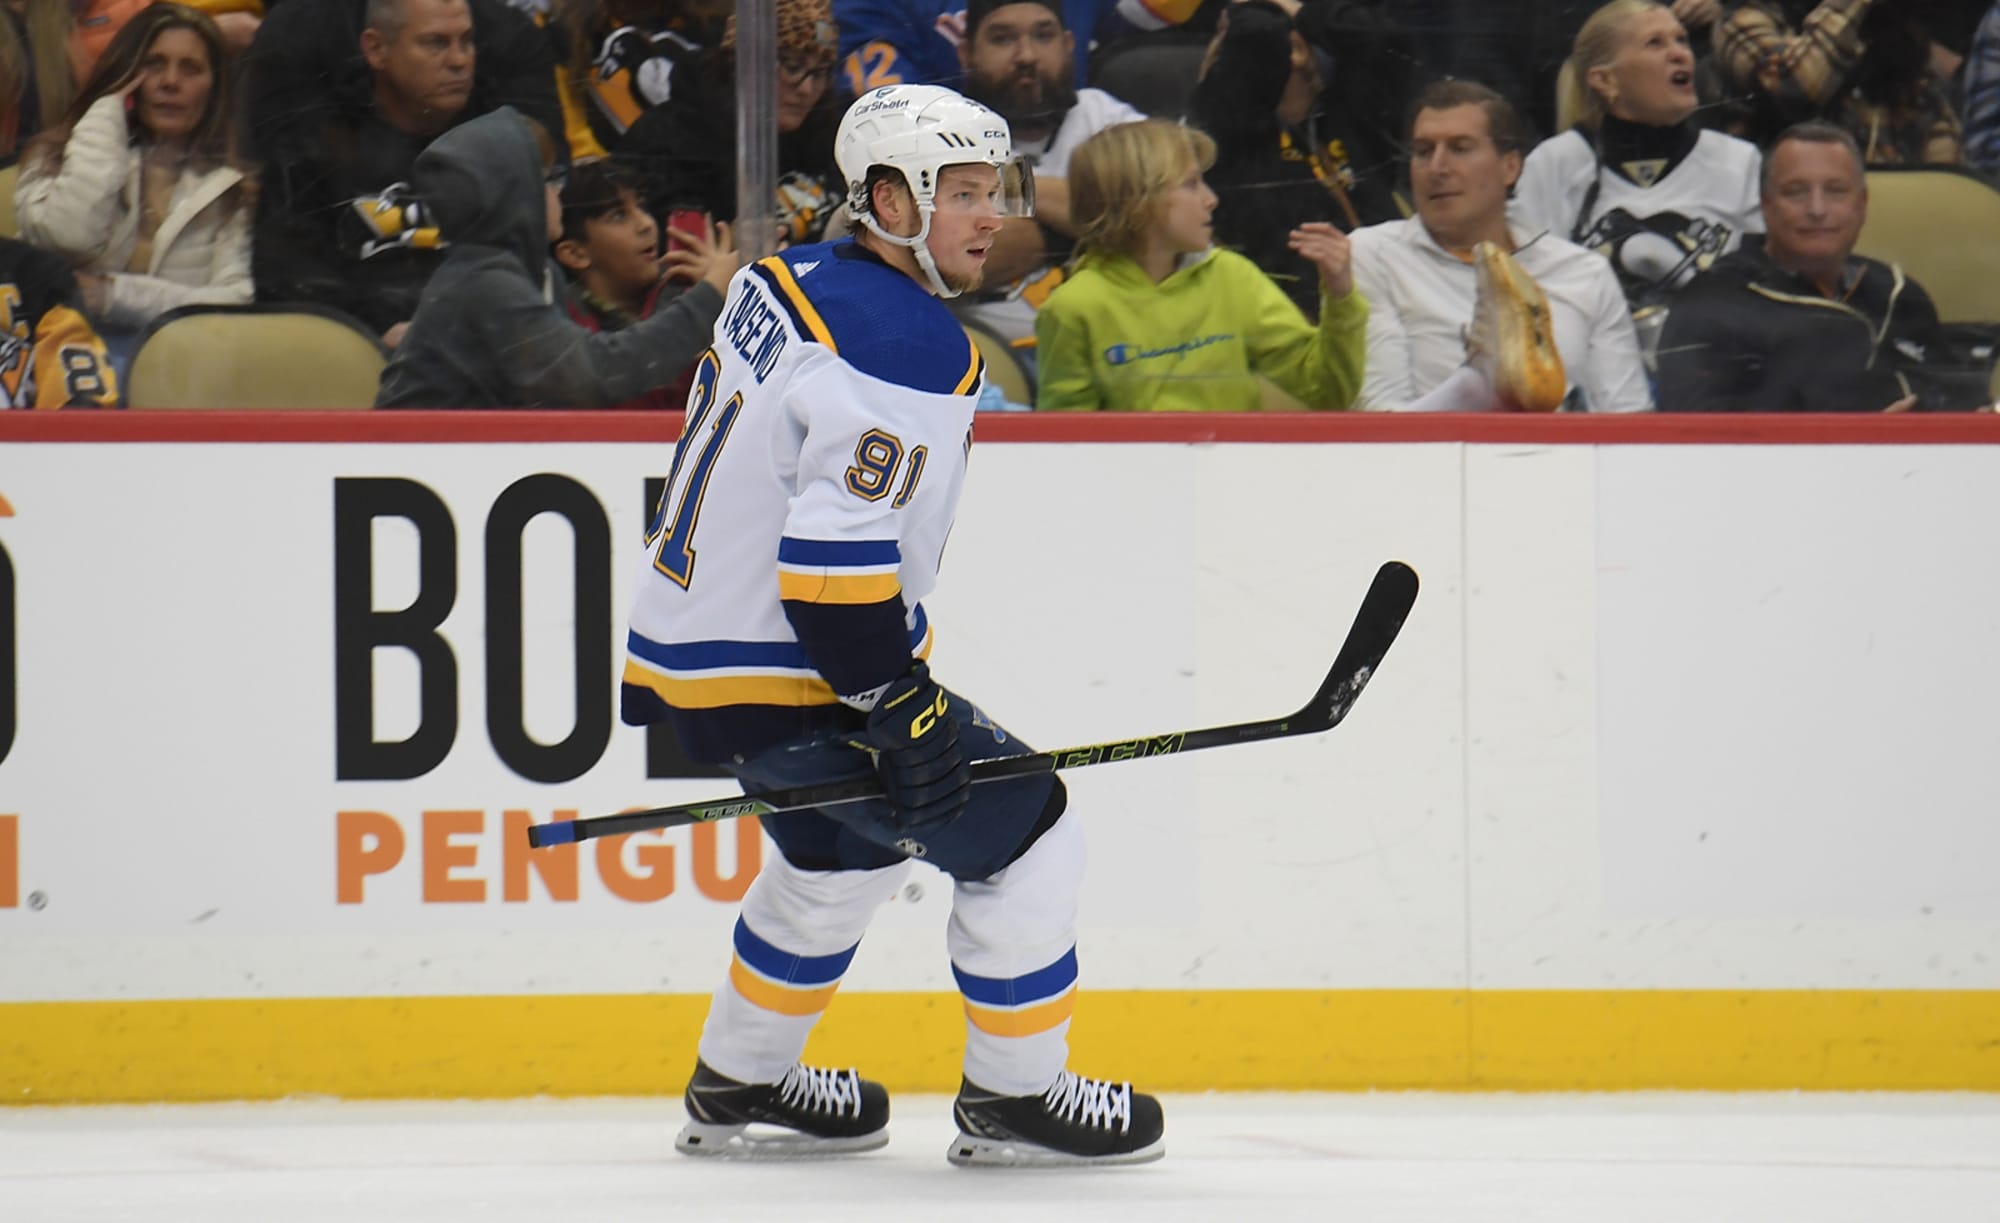 Blais comes home, matches Tarasenko with goal in first game since